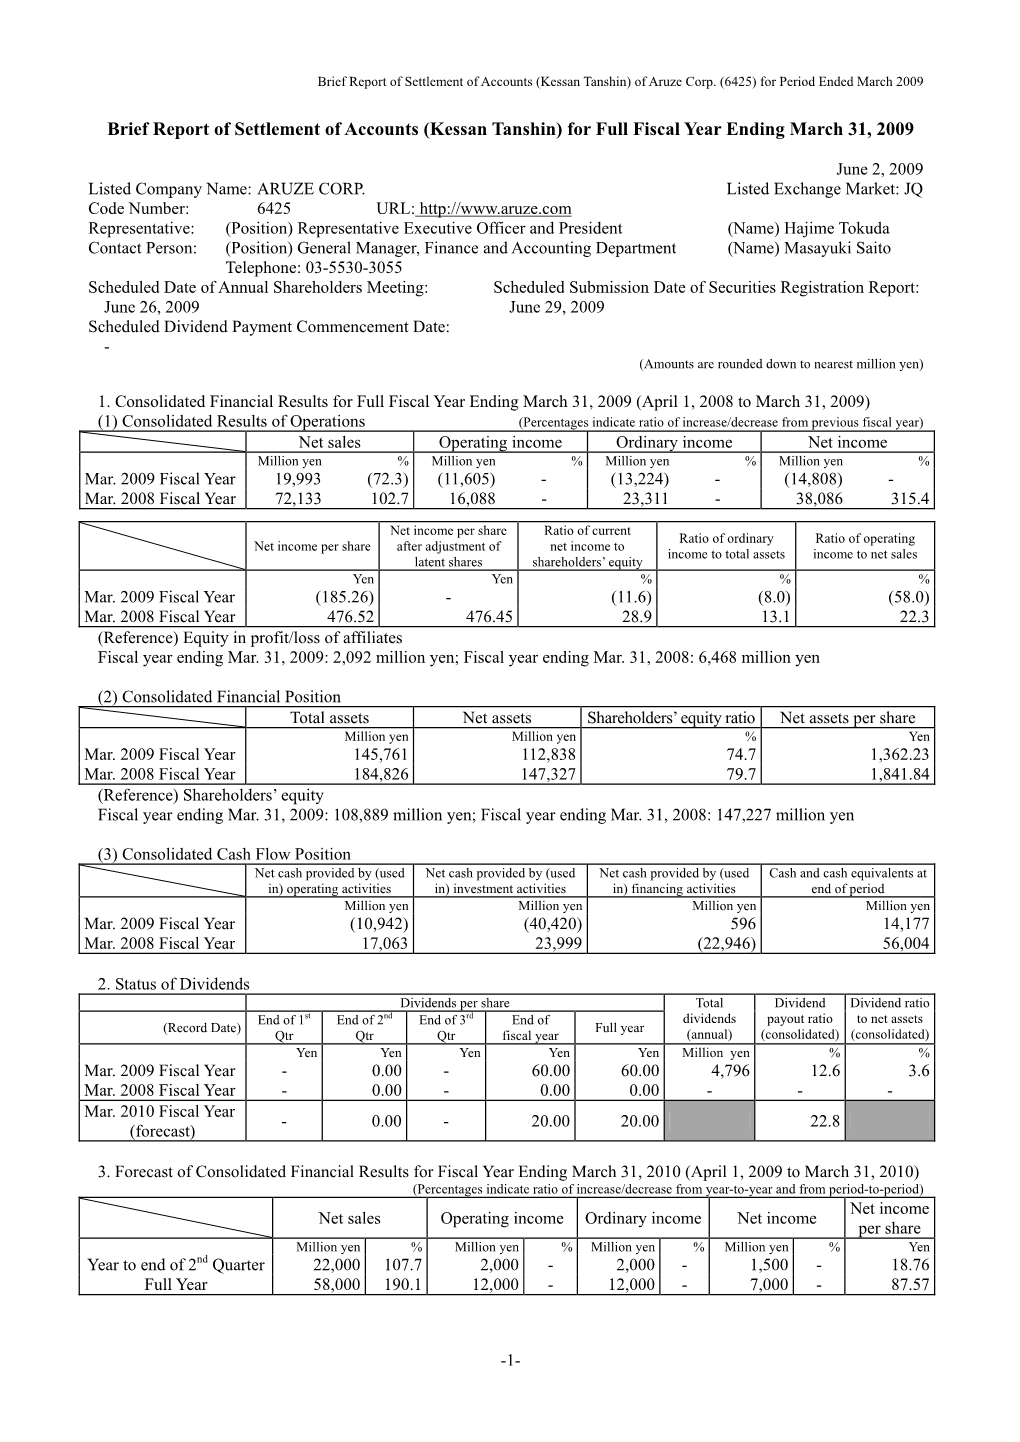 Brief Report of Settlement of Accounts (Kessan Tanshin) for Full Fiscal Year Ending March 31, 2009